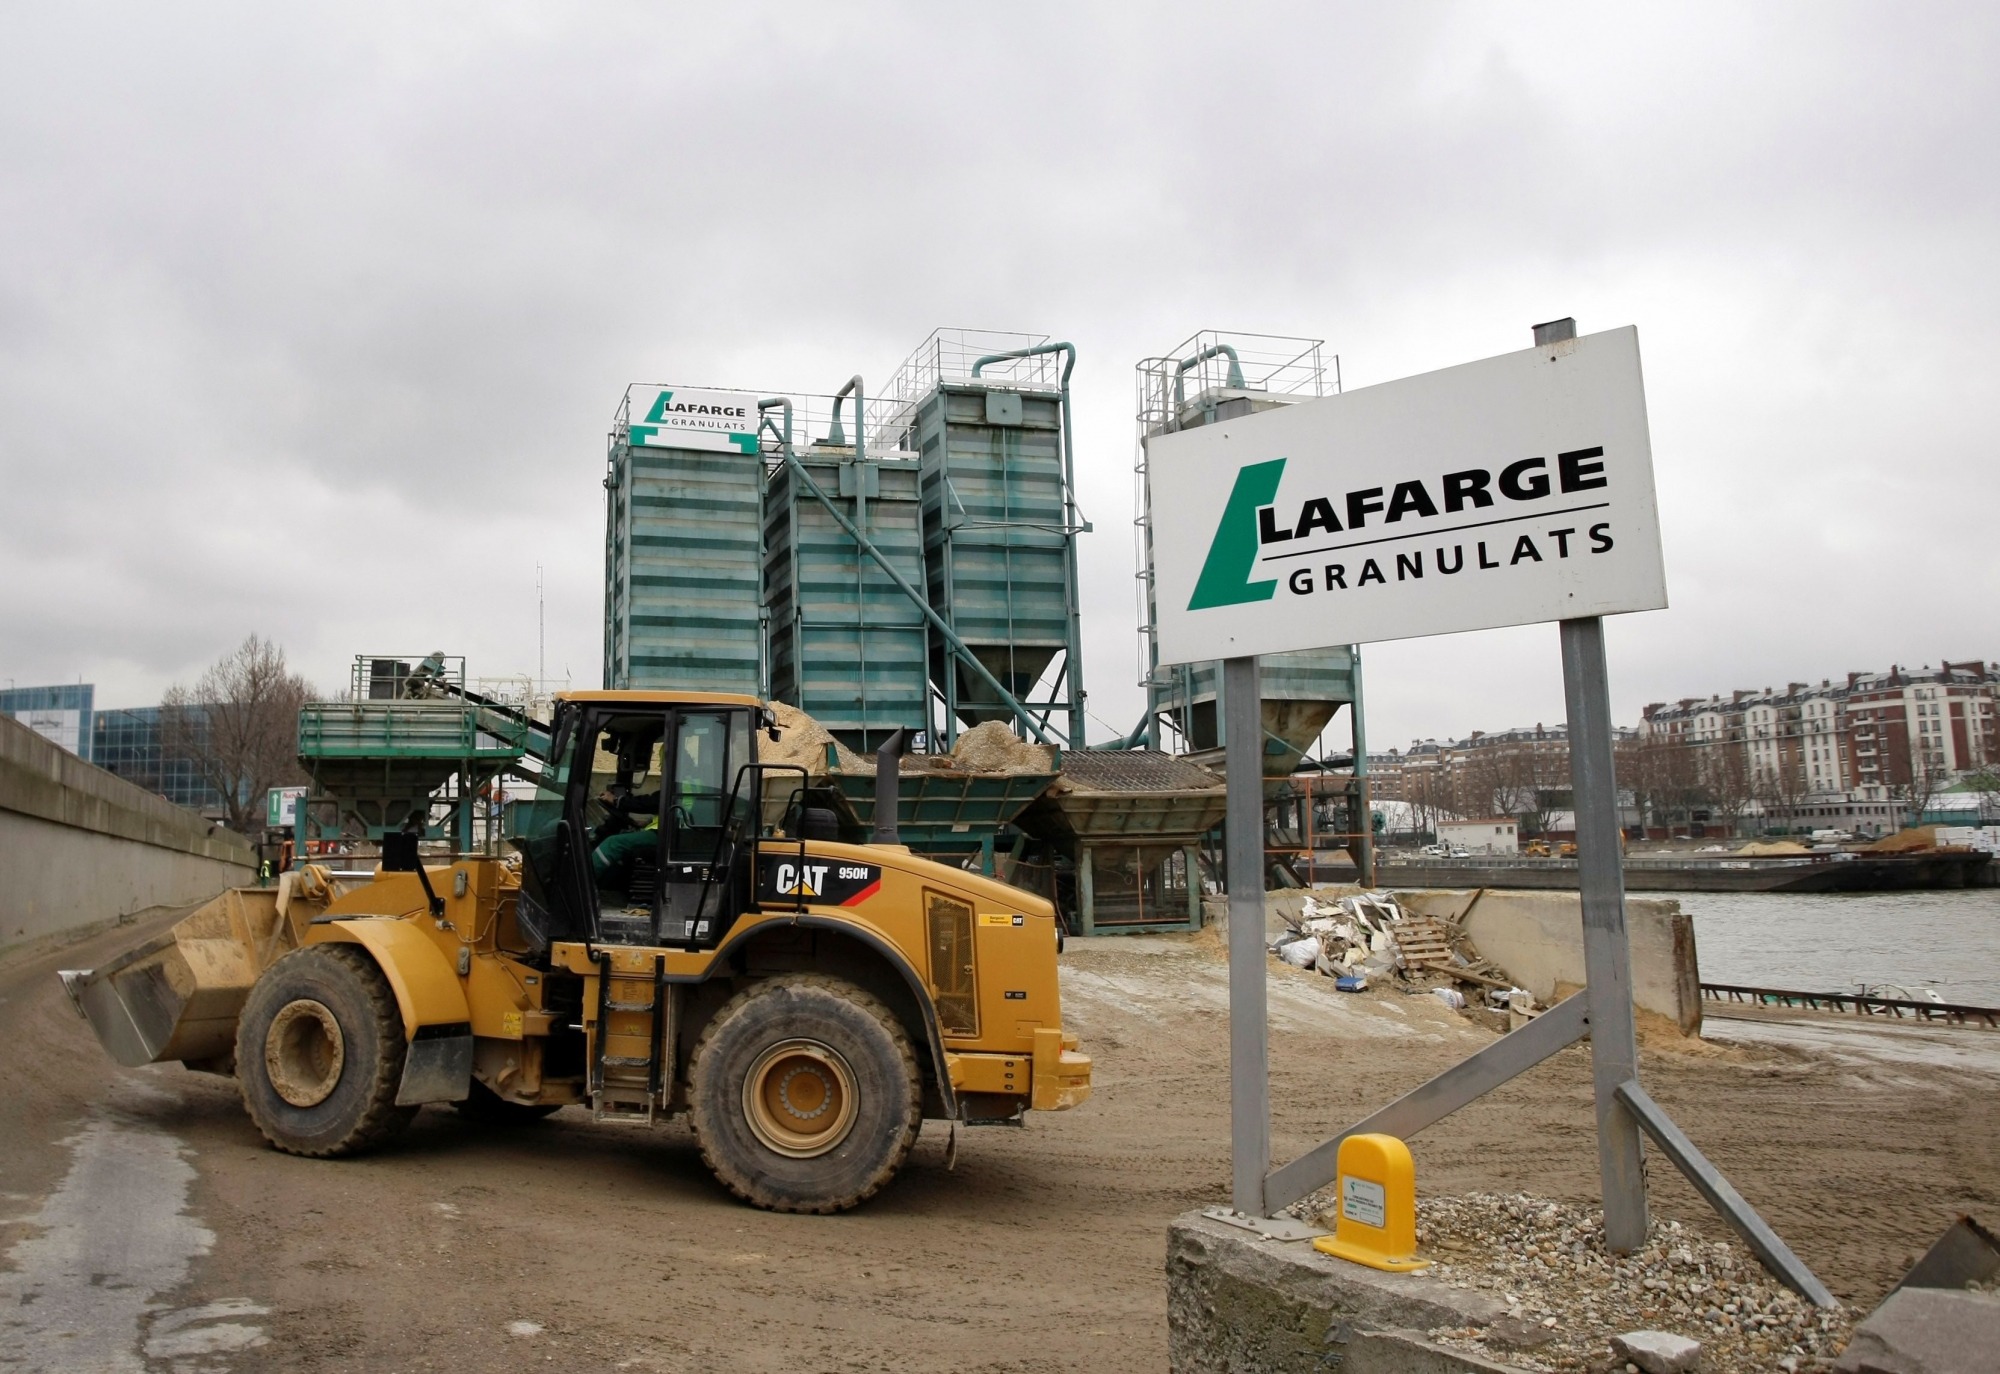 A Caterpillar drives at a French construction materials group Lafarge site in Paris, Wednesday Feb.18, 2009. Lafarge is a cement, plaster and concrete company.(AP Photo/Thibault Camus) FRANKREICH LAFARGE